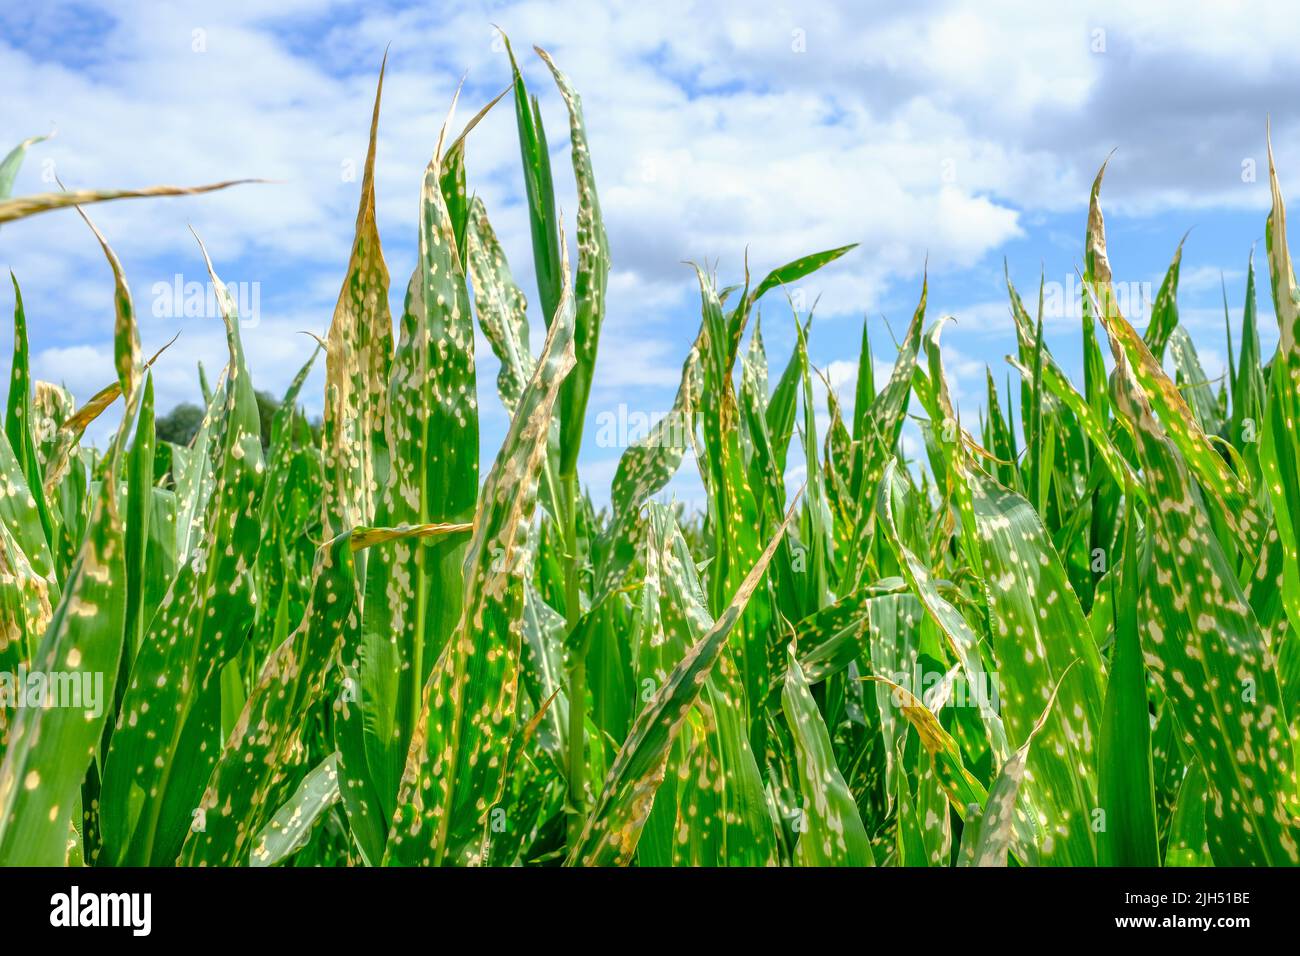 Corn plants wilting and dead after wrong applying herbicide in cornfield Stock Photo